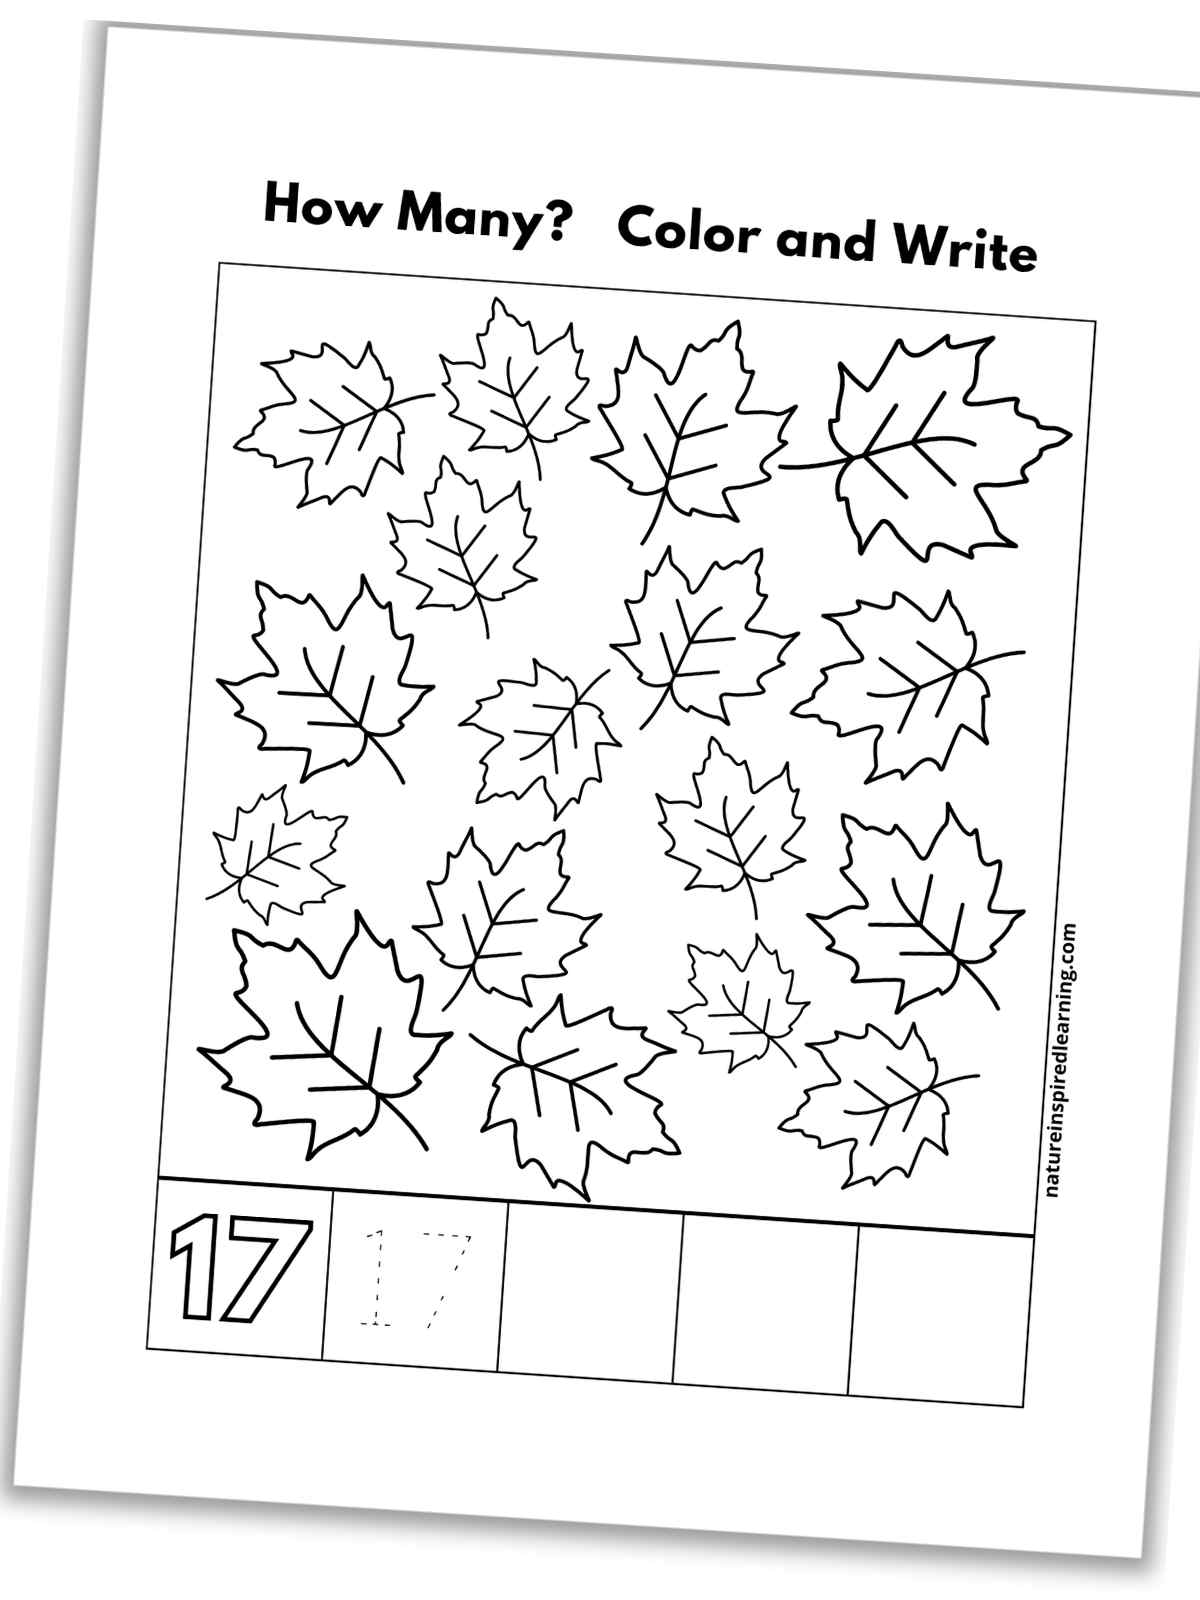 black and white number seventeen worksheet with leaves, outline of number 17, a traceable 17, and blank boxes slanted with a drop shadow